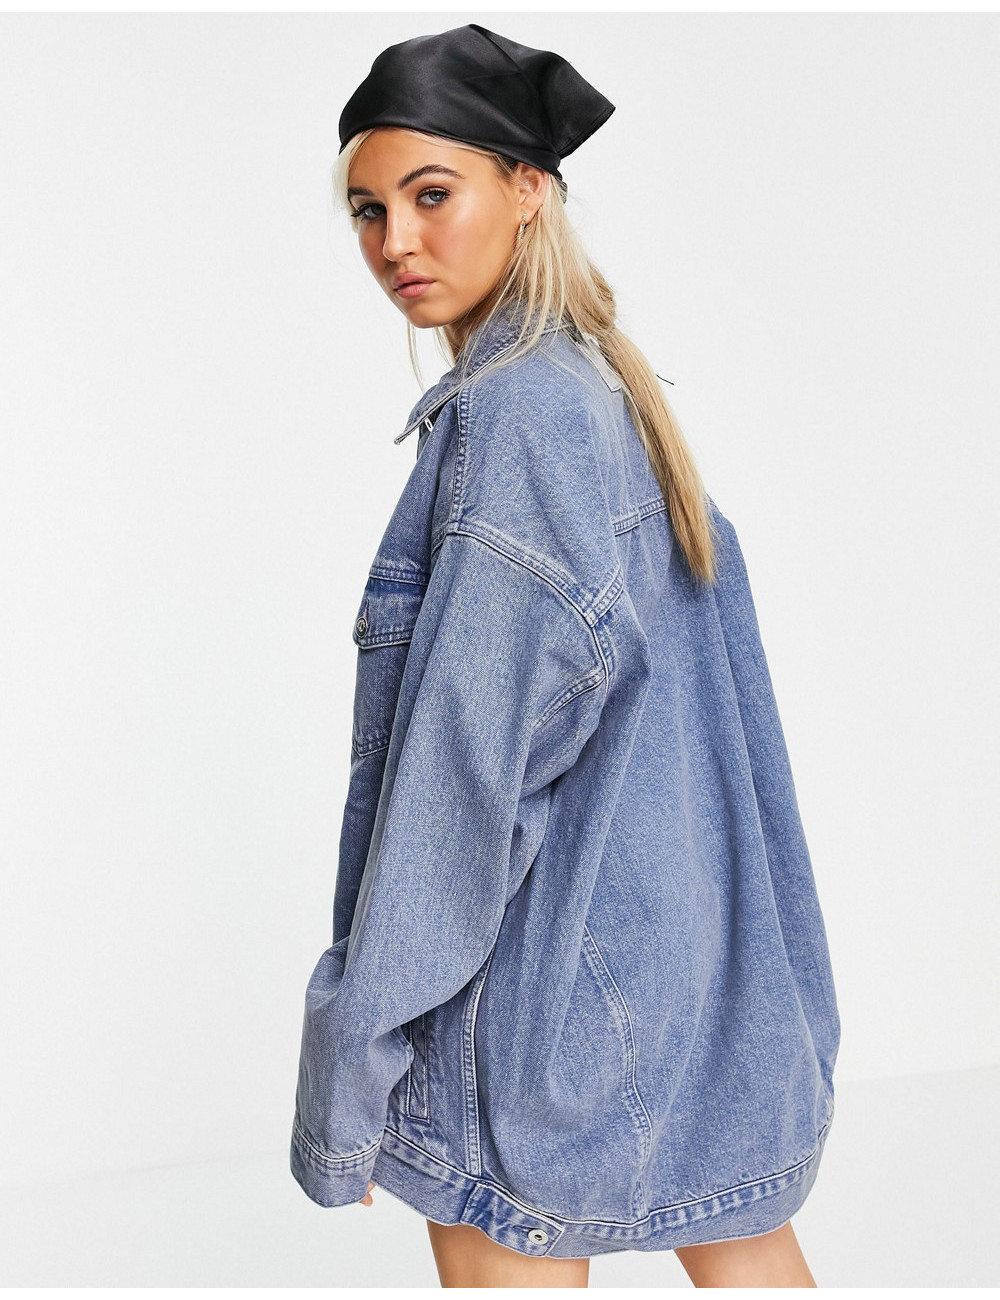 COLLUSION denim jacket with...